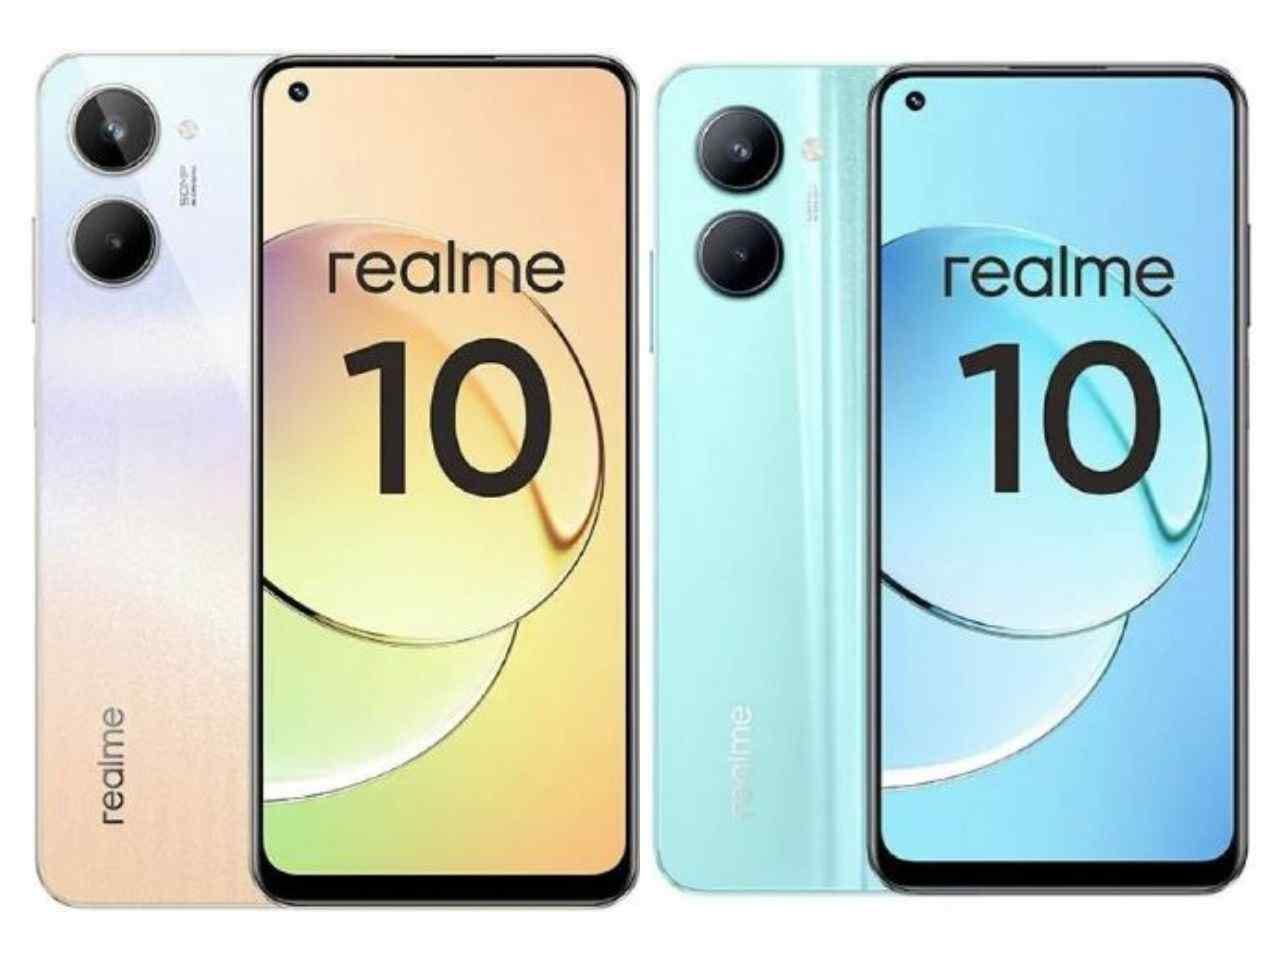 Realme launched a budget-friendly smartphone for low-budget people